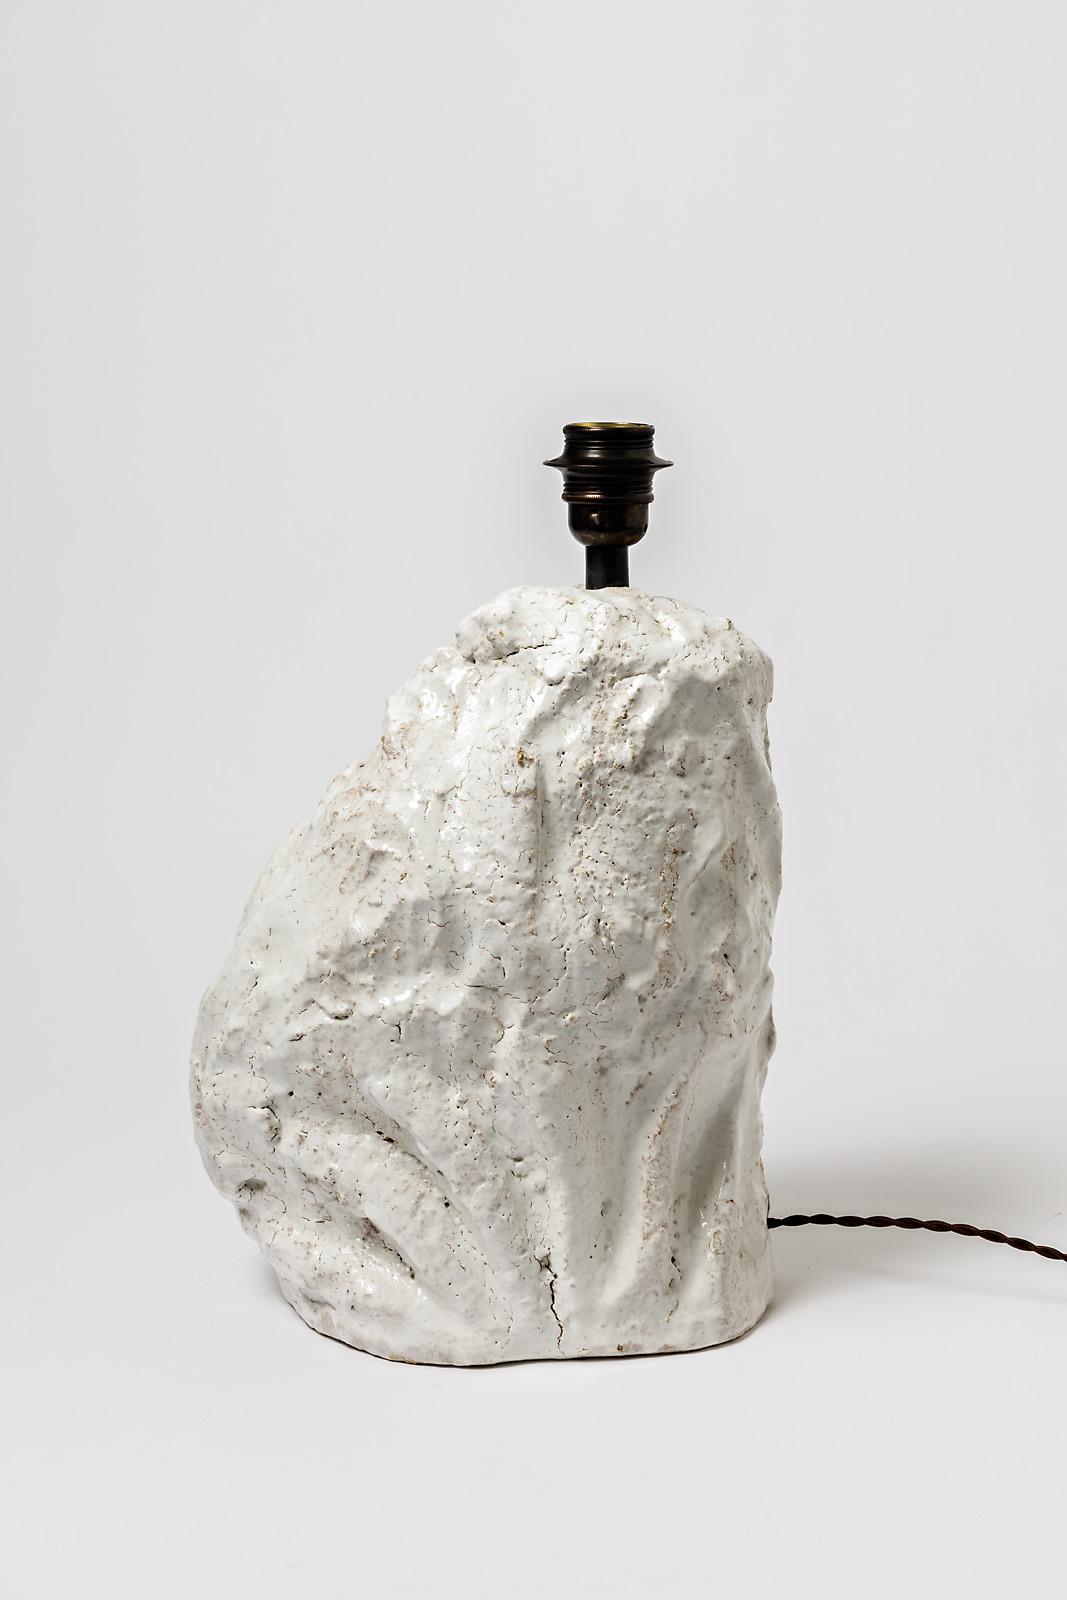 Beaux Arts Ceramic Table Lamp with White Glaze by Hervé Rousseau, 2022 / Ref 10